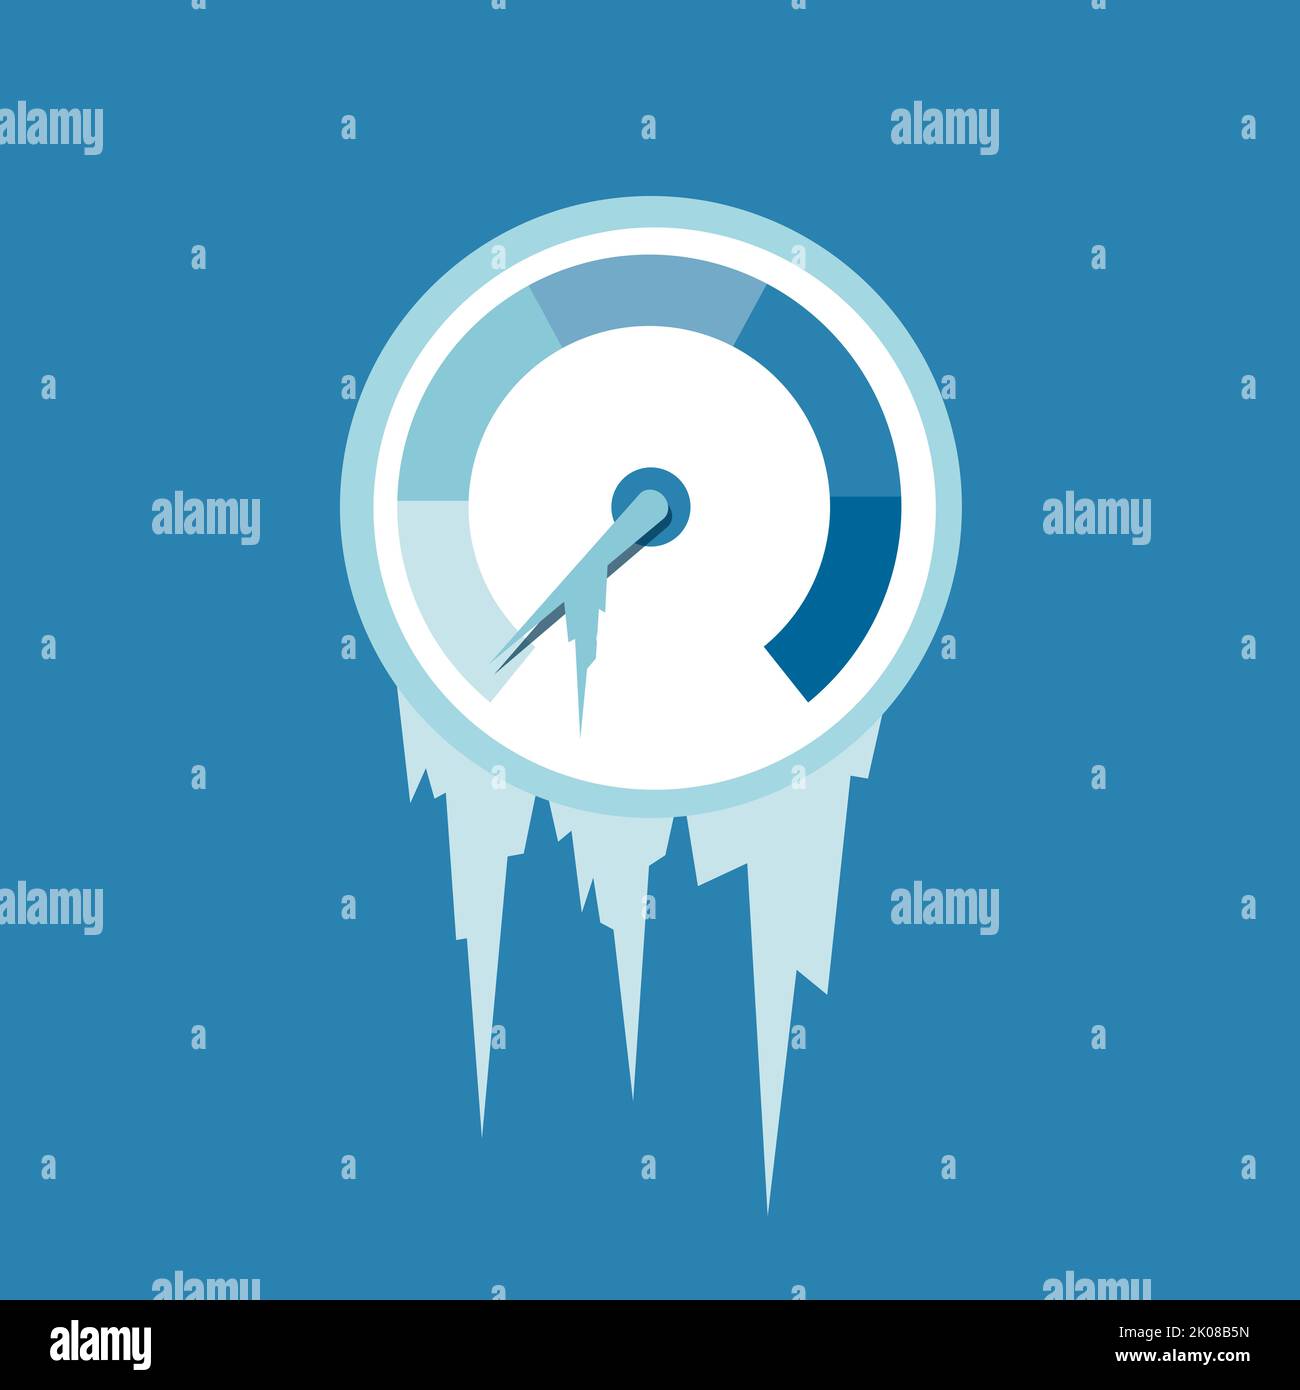 Frozen dial is displaying zero as metaphor of stop, stoppage, halt and cut off of energy supply leading to cold frost and ice in the winter. Vector il Stock Photo